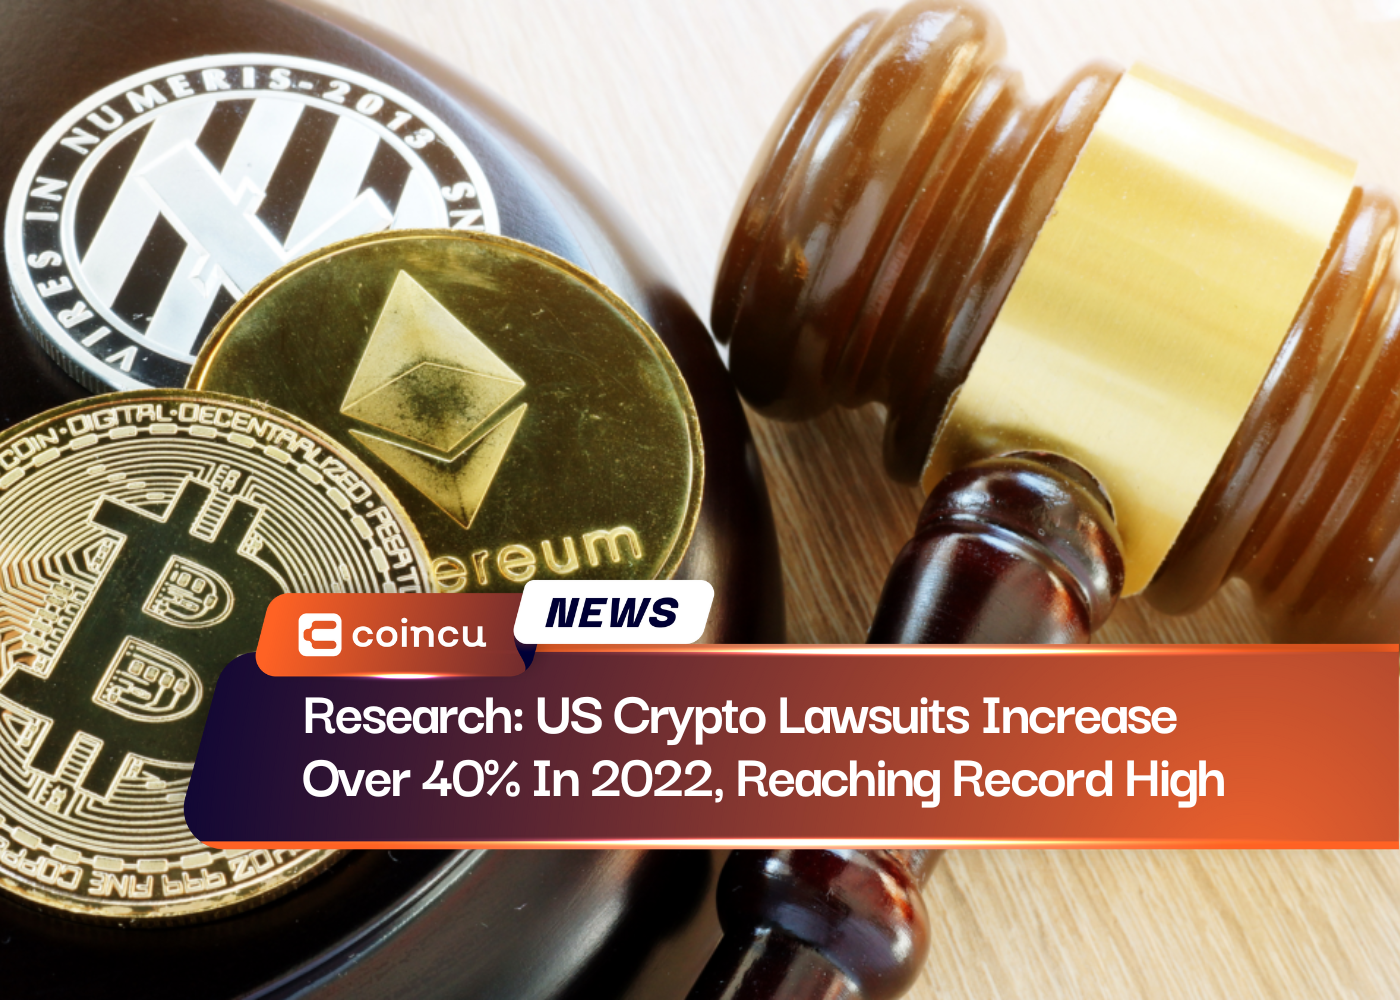 Research: US Crypto Lawsuits Increase Over 40% In 2022, Reaching Record High